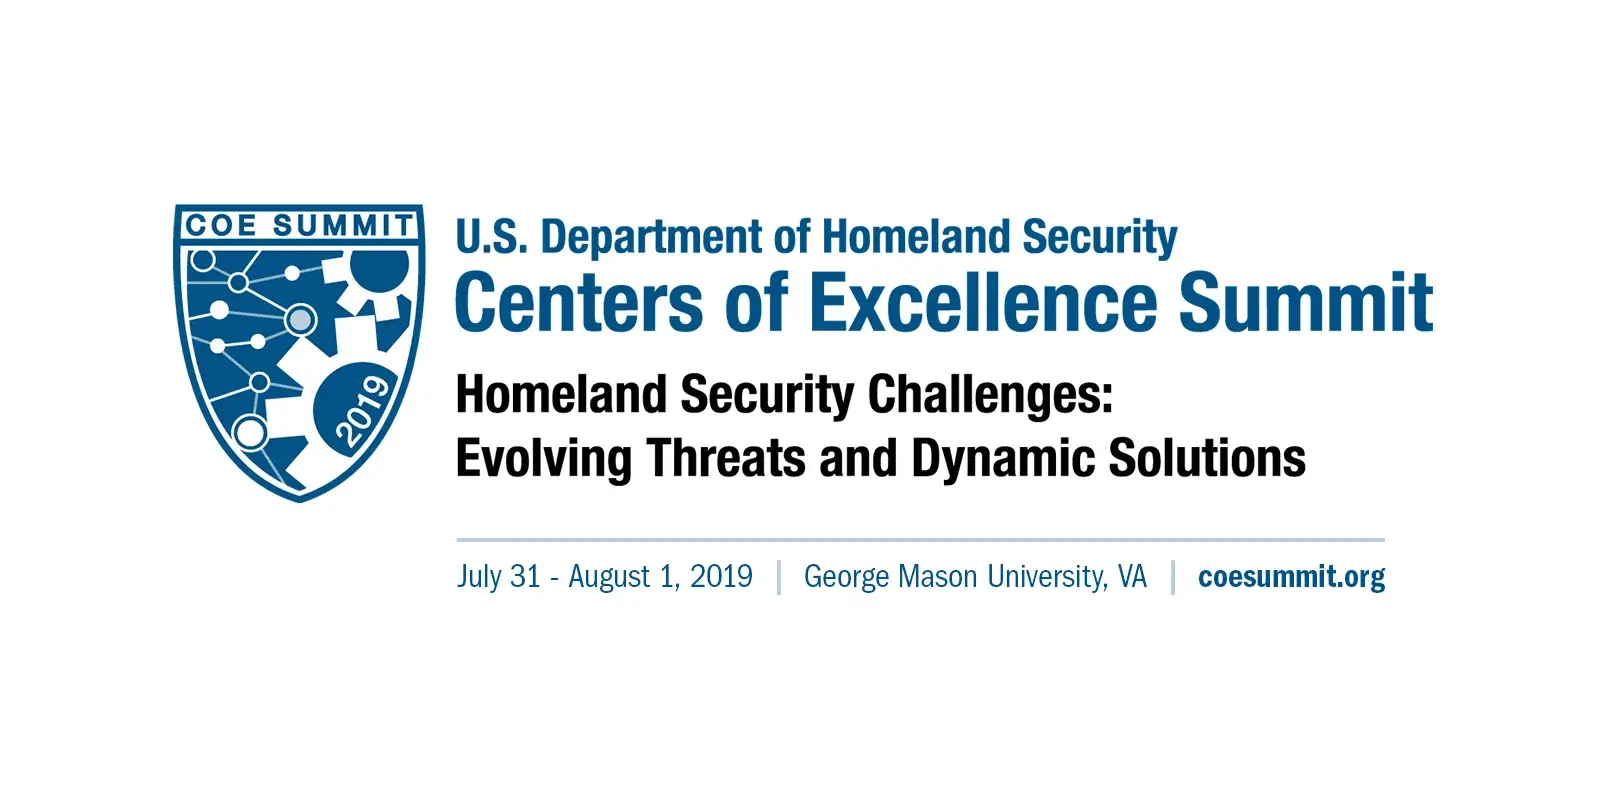 U.S. Department of Homeland Security. Centers of Excellence Summit. Homeland Security Challenges: Evolving Threats and Dynamic Solutions. July 31 to August 1, 2019. George Mason University, Va. Coesummit.org COE Summit 2019 logomark.